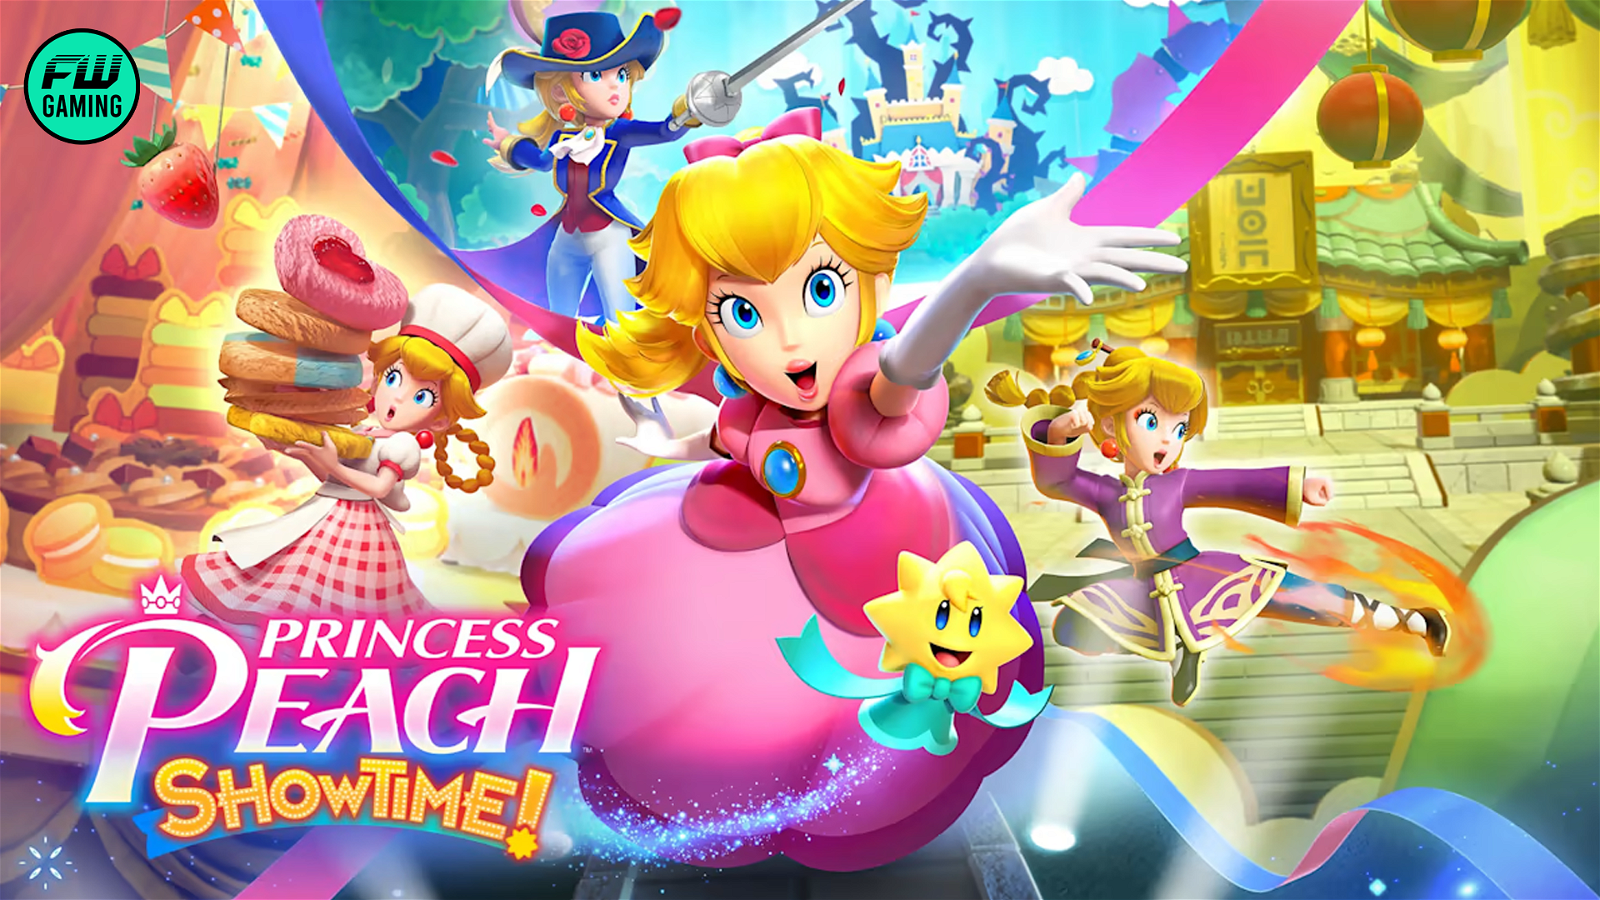 New Princess Peach Game Announced – Multiple Powers, Multiple Outfits, One Heroine